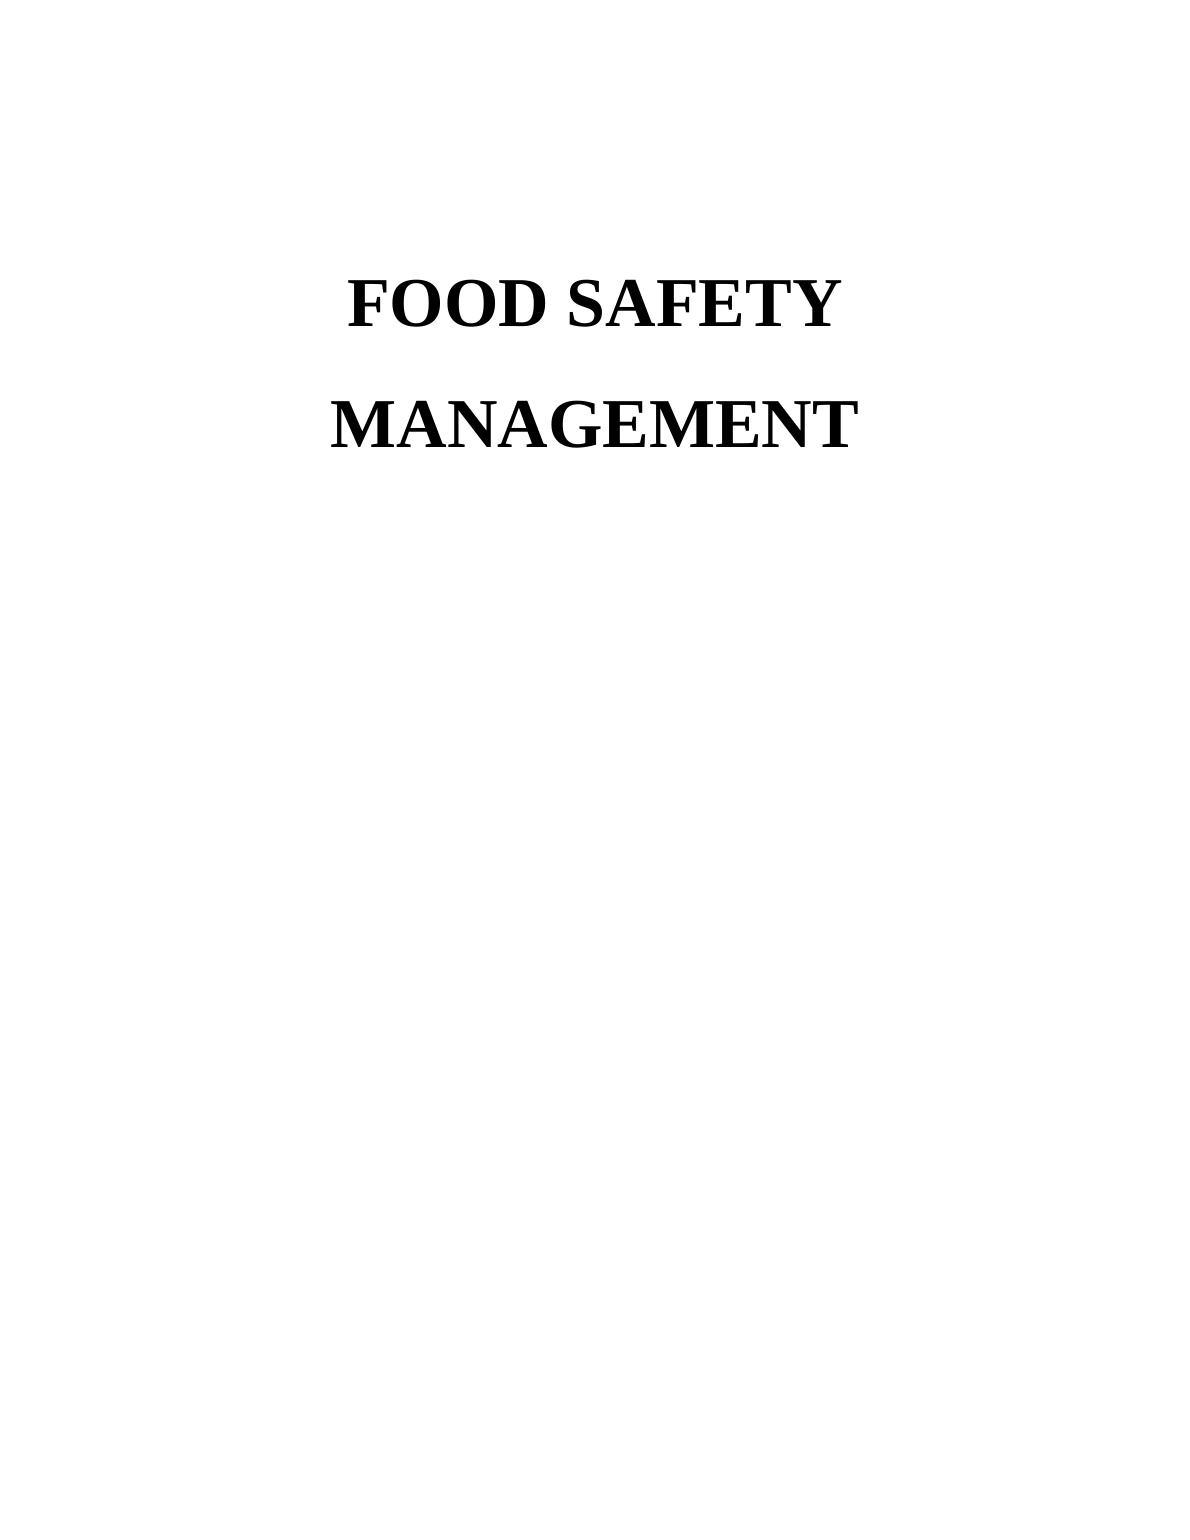 Food Safety Management Assignment Solution - Doc_1